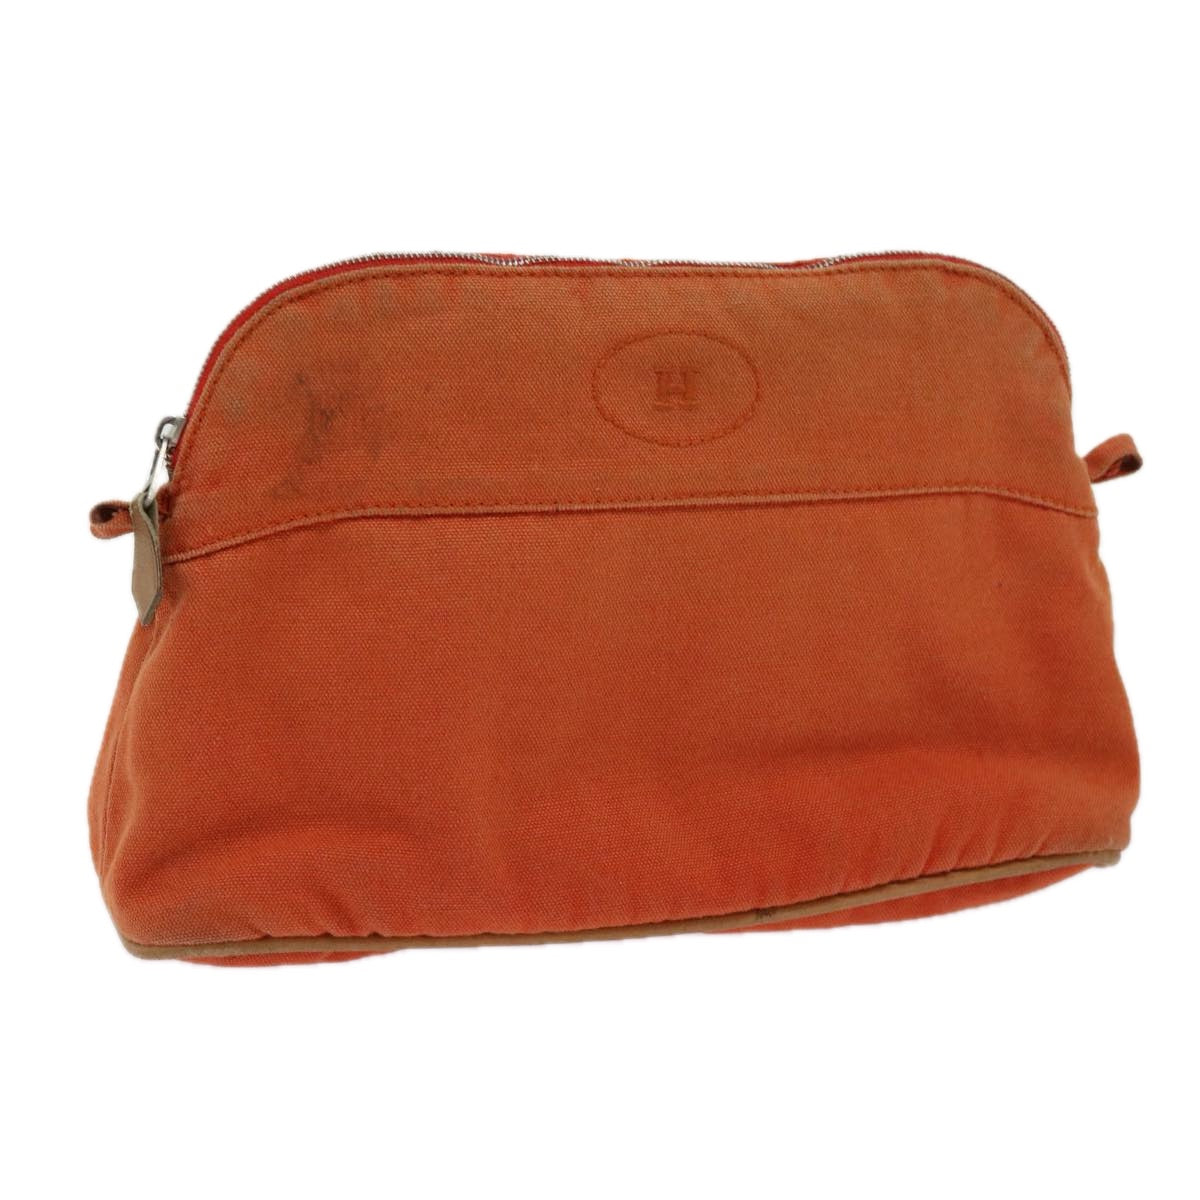 HERMES Bolide Pouch Canvas Orange Auth 62680